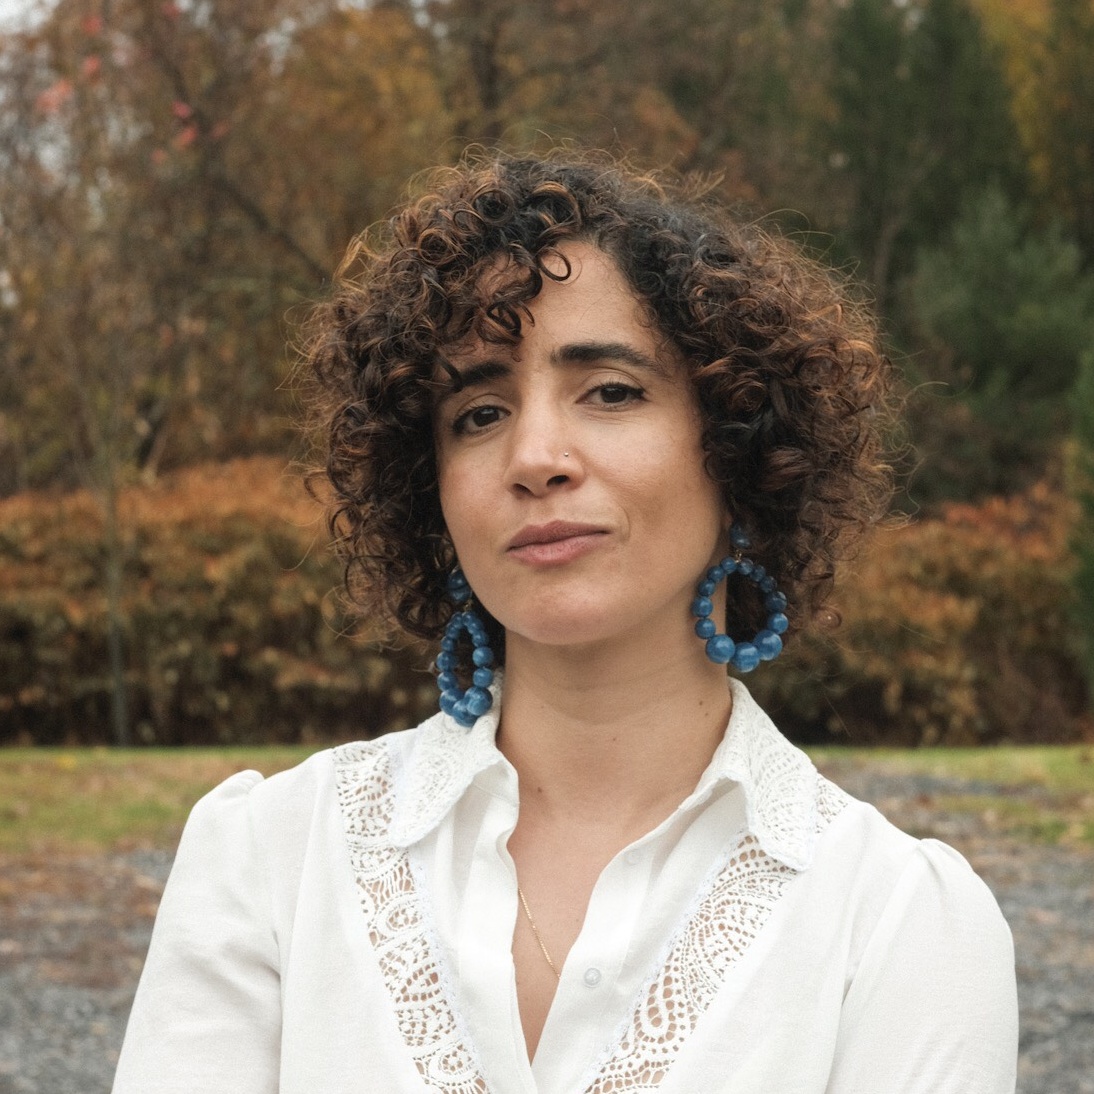 Bard College Receives $2,000,000 from the Mellon Foundation to Support the Work of Artist Tania El Khoury